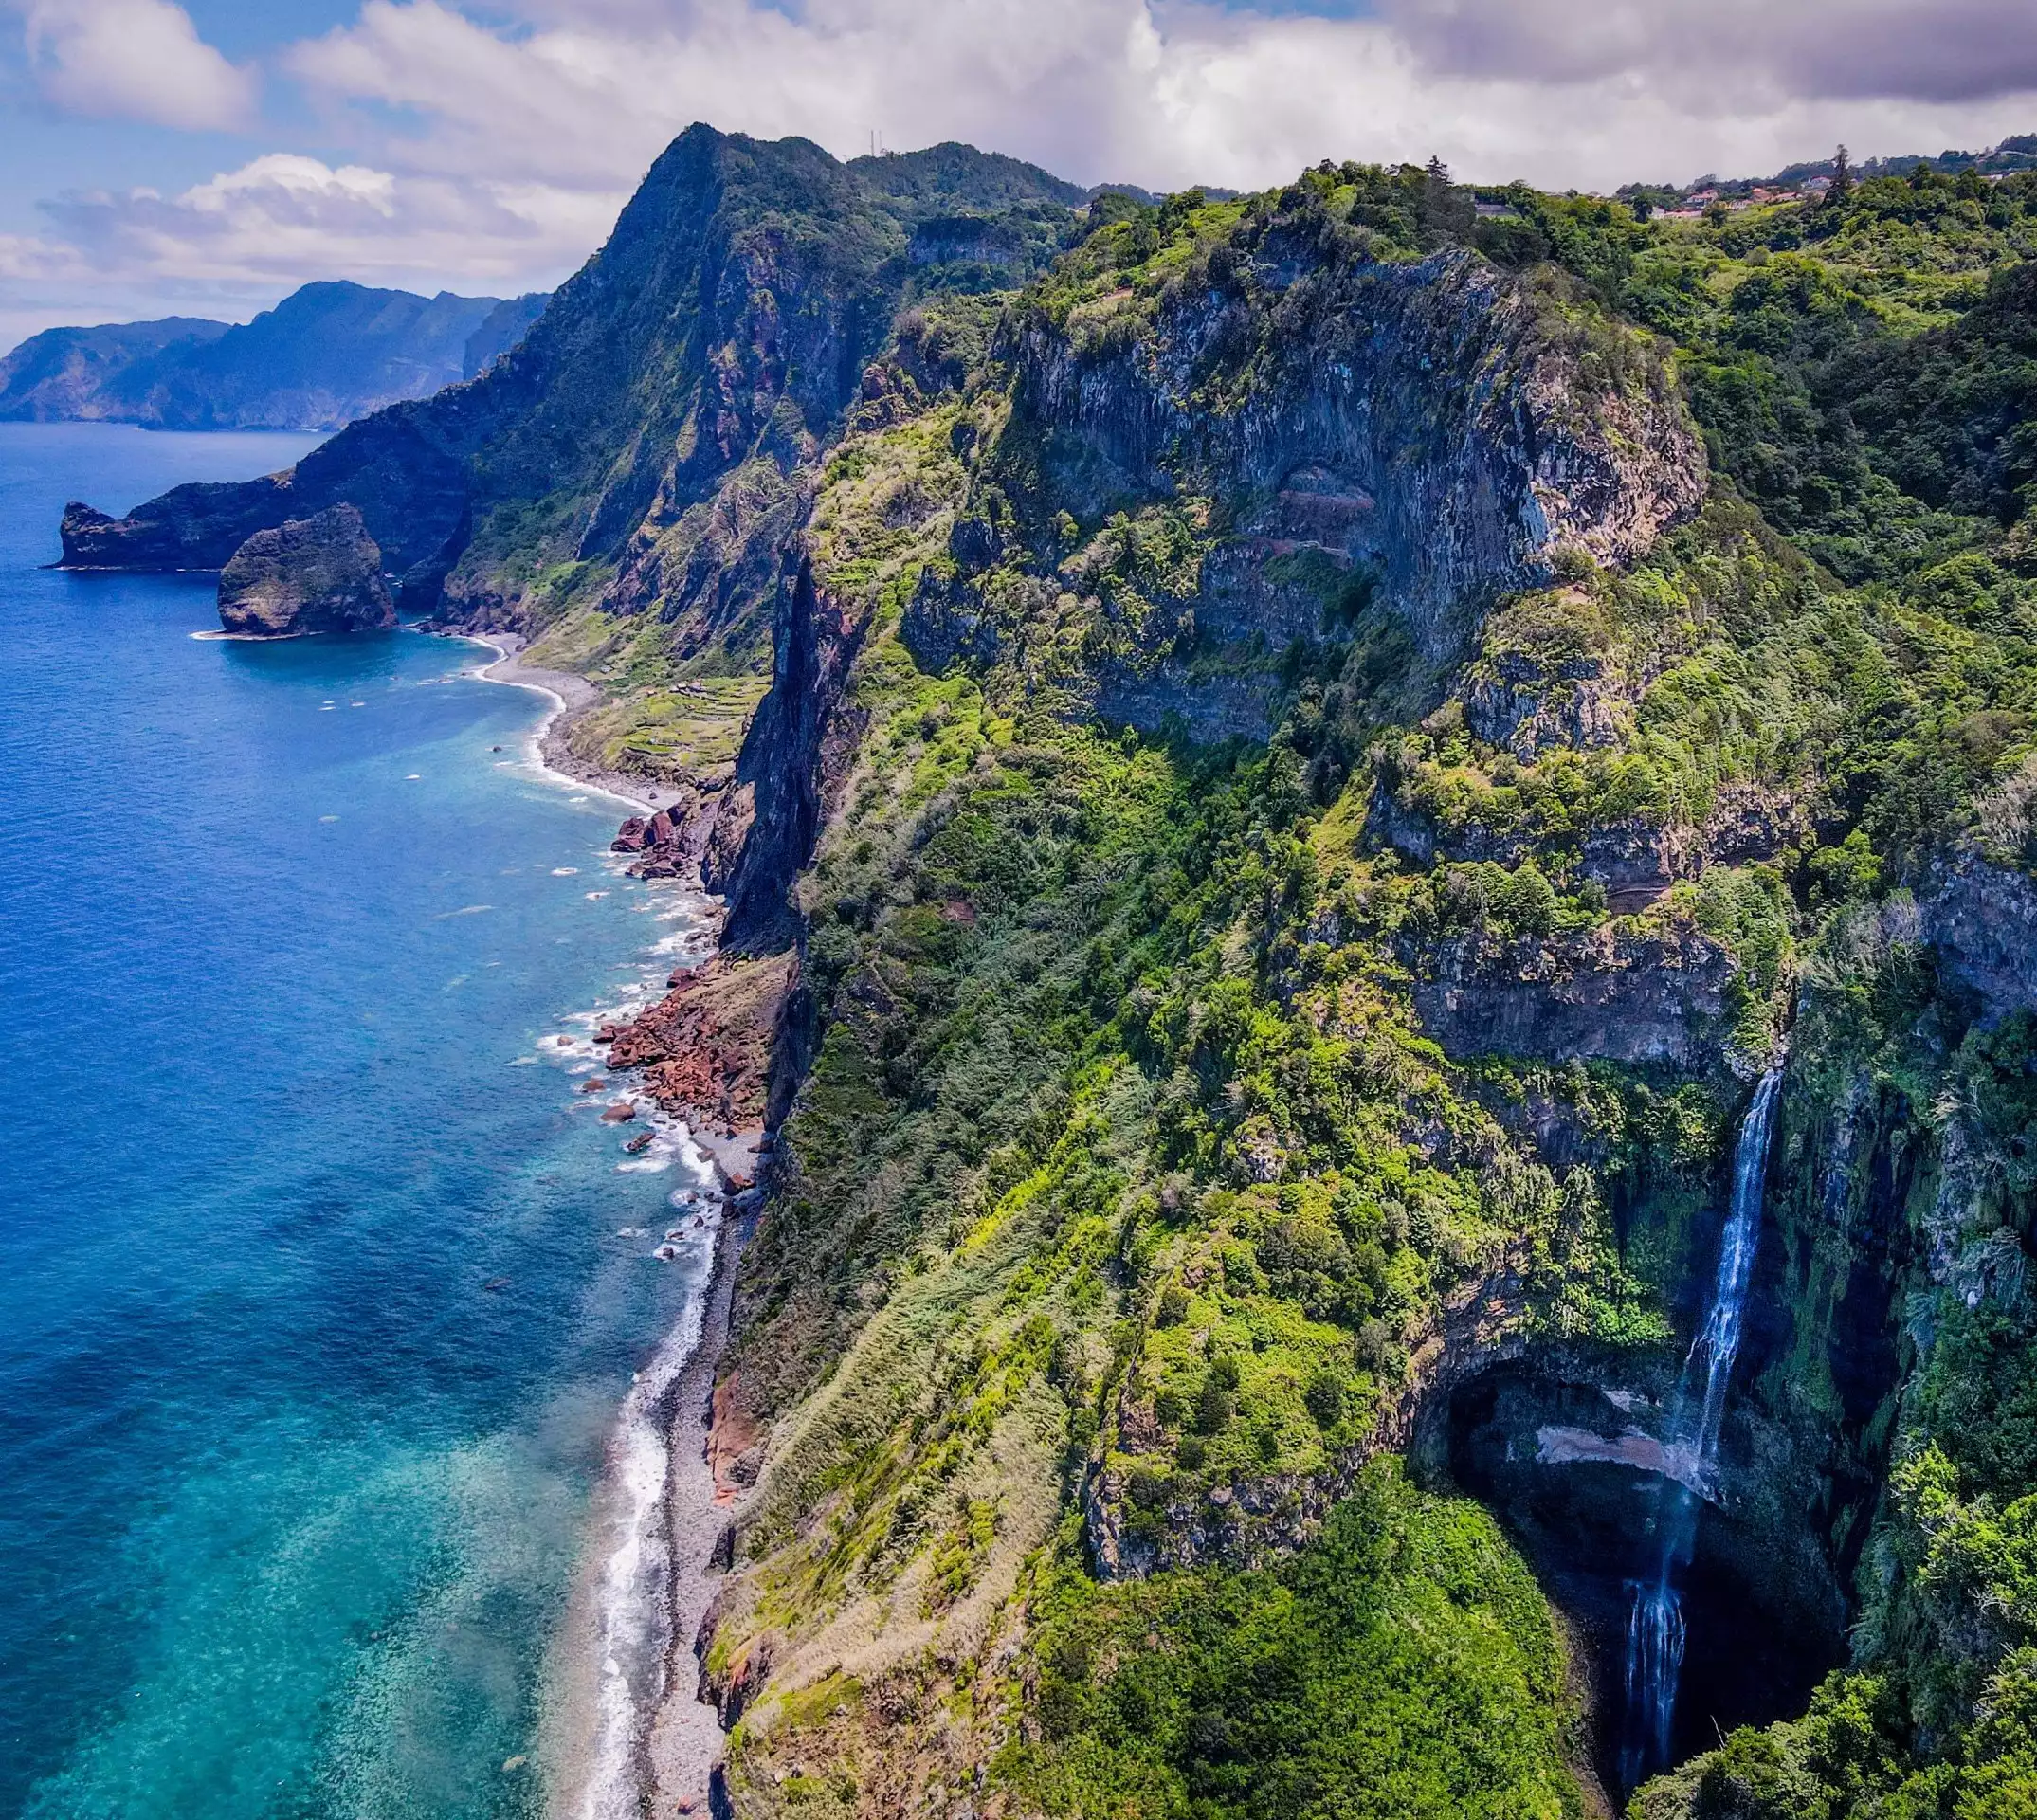 Holiday Madeira | Travel to the 'Hawaii of Europe'